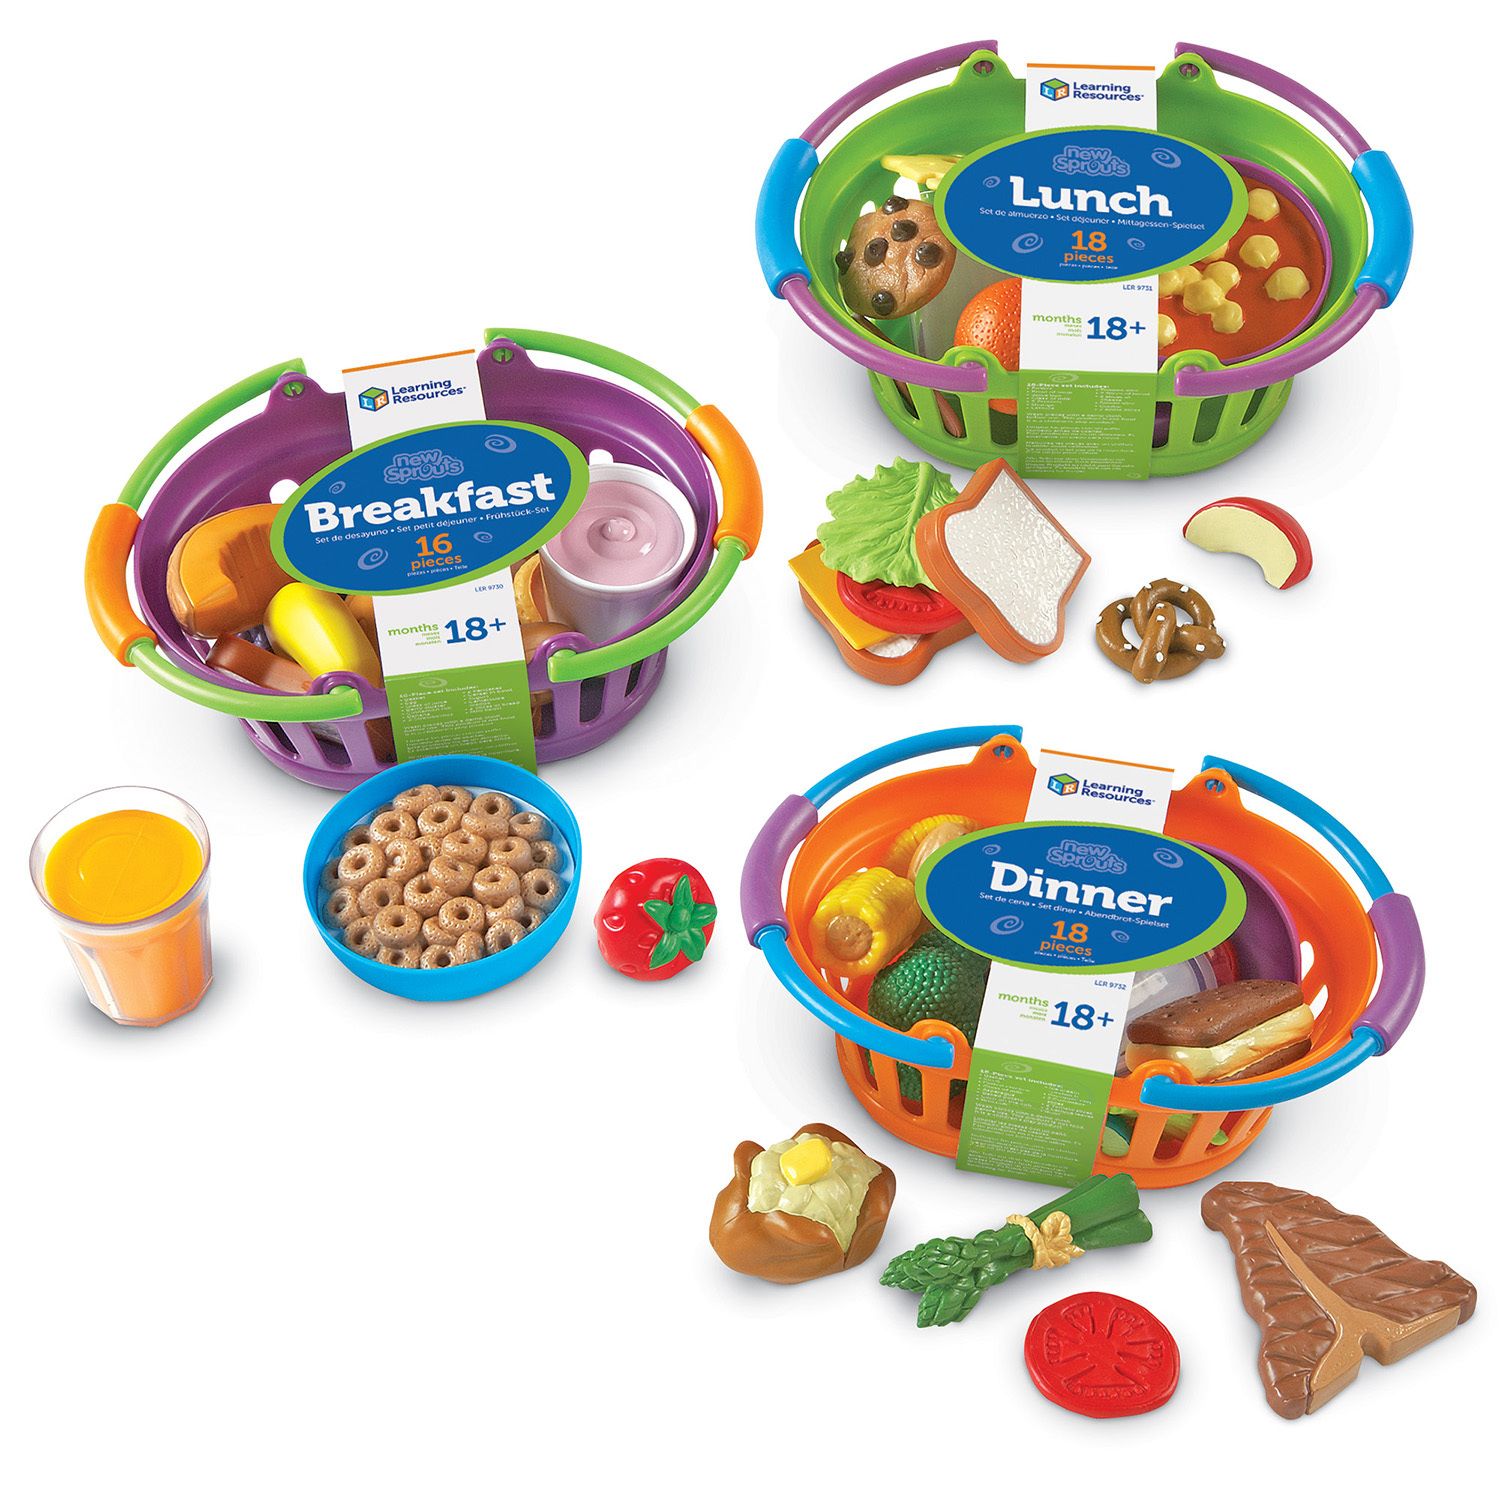 Image for Learning Resources New Sprouts 3 Basket Bundle at Kohl's.